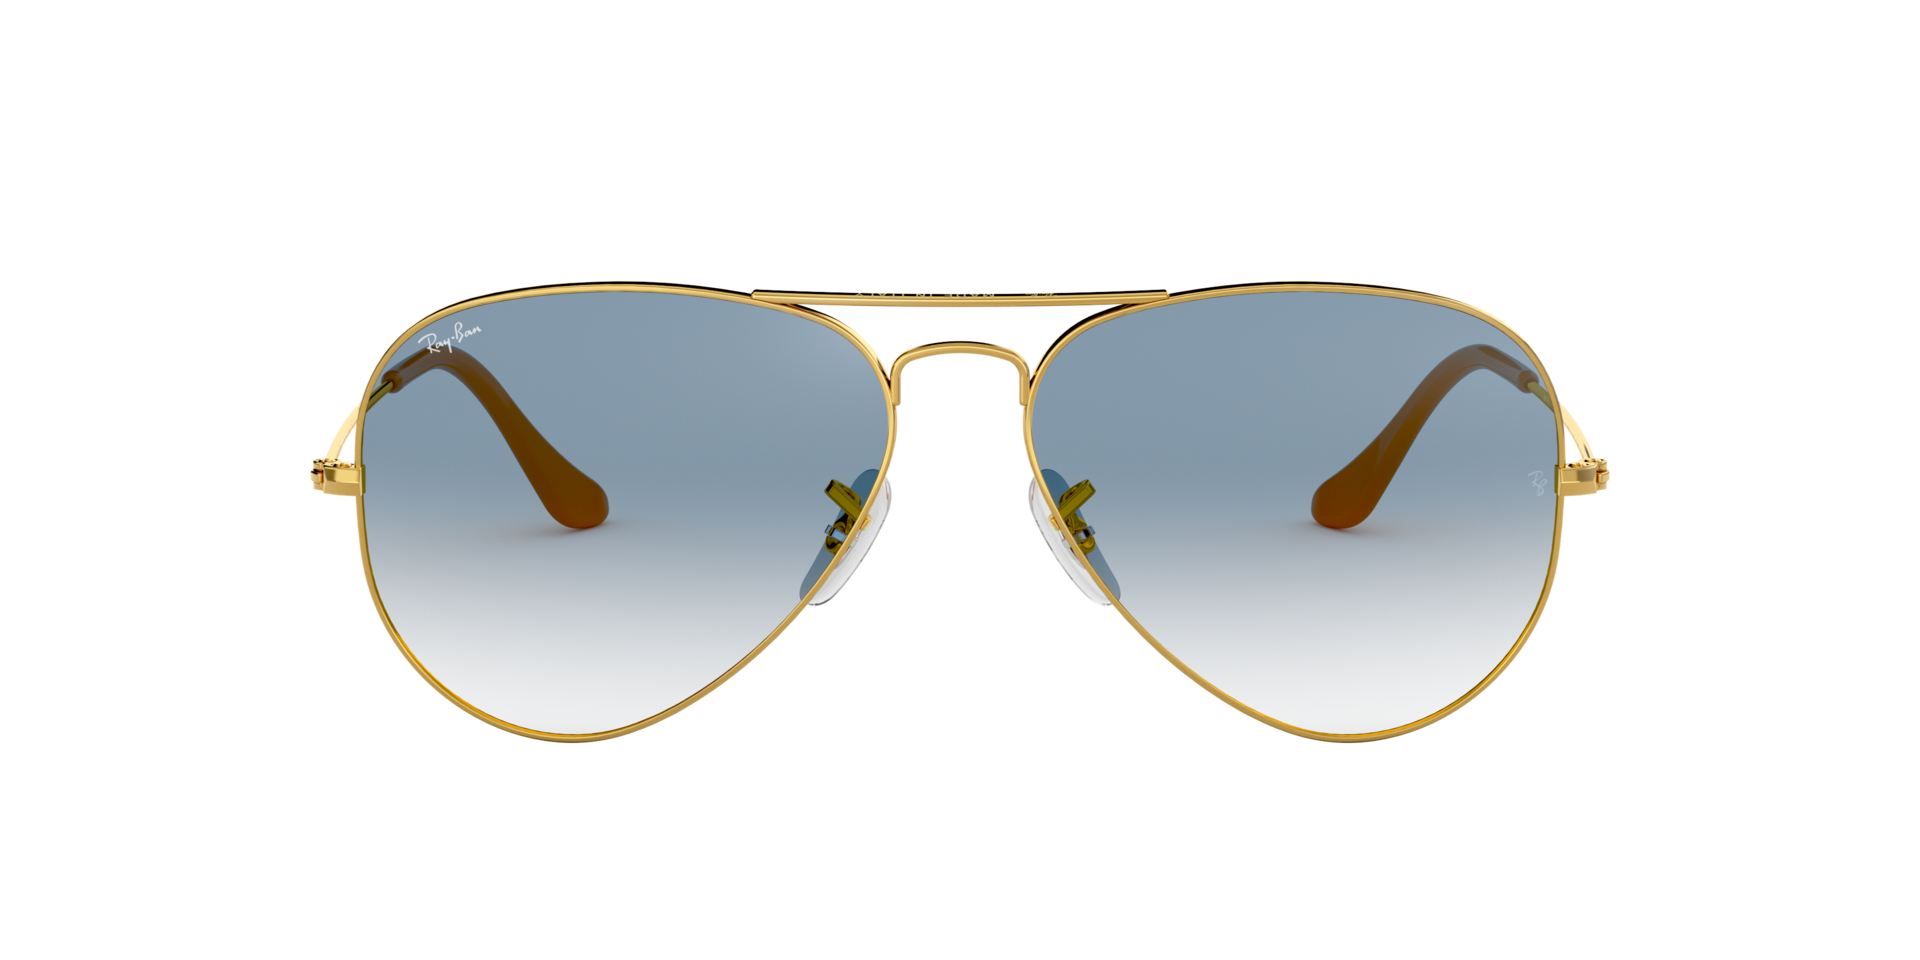 Ray Ban Aviator Large Metal Sonnenbrille RB3025 001/3F 55